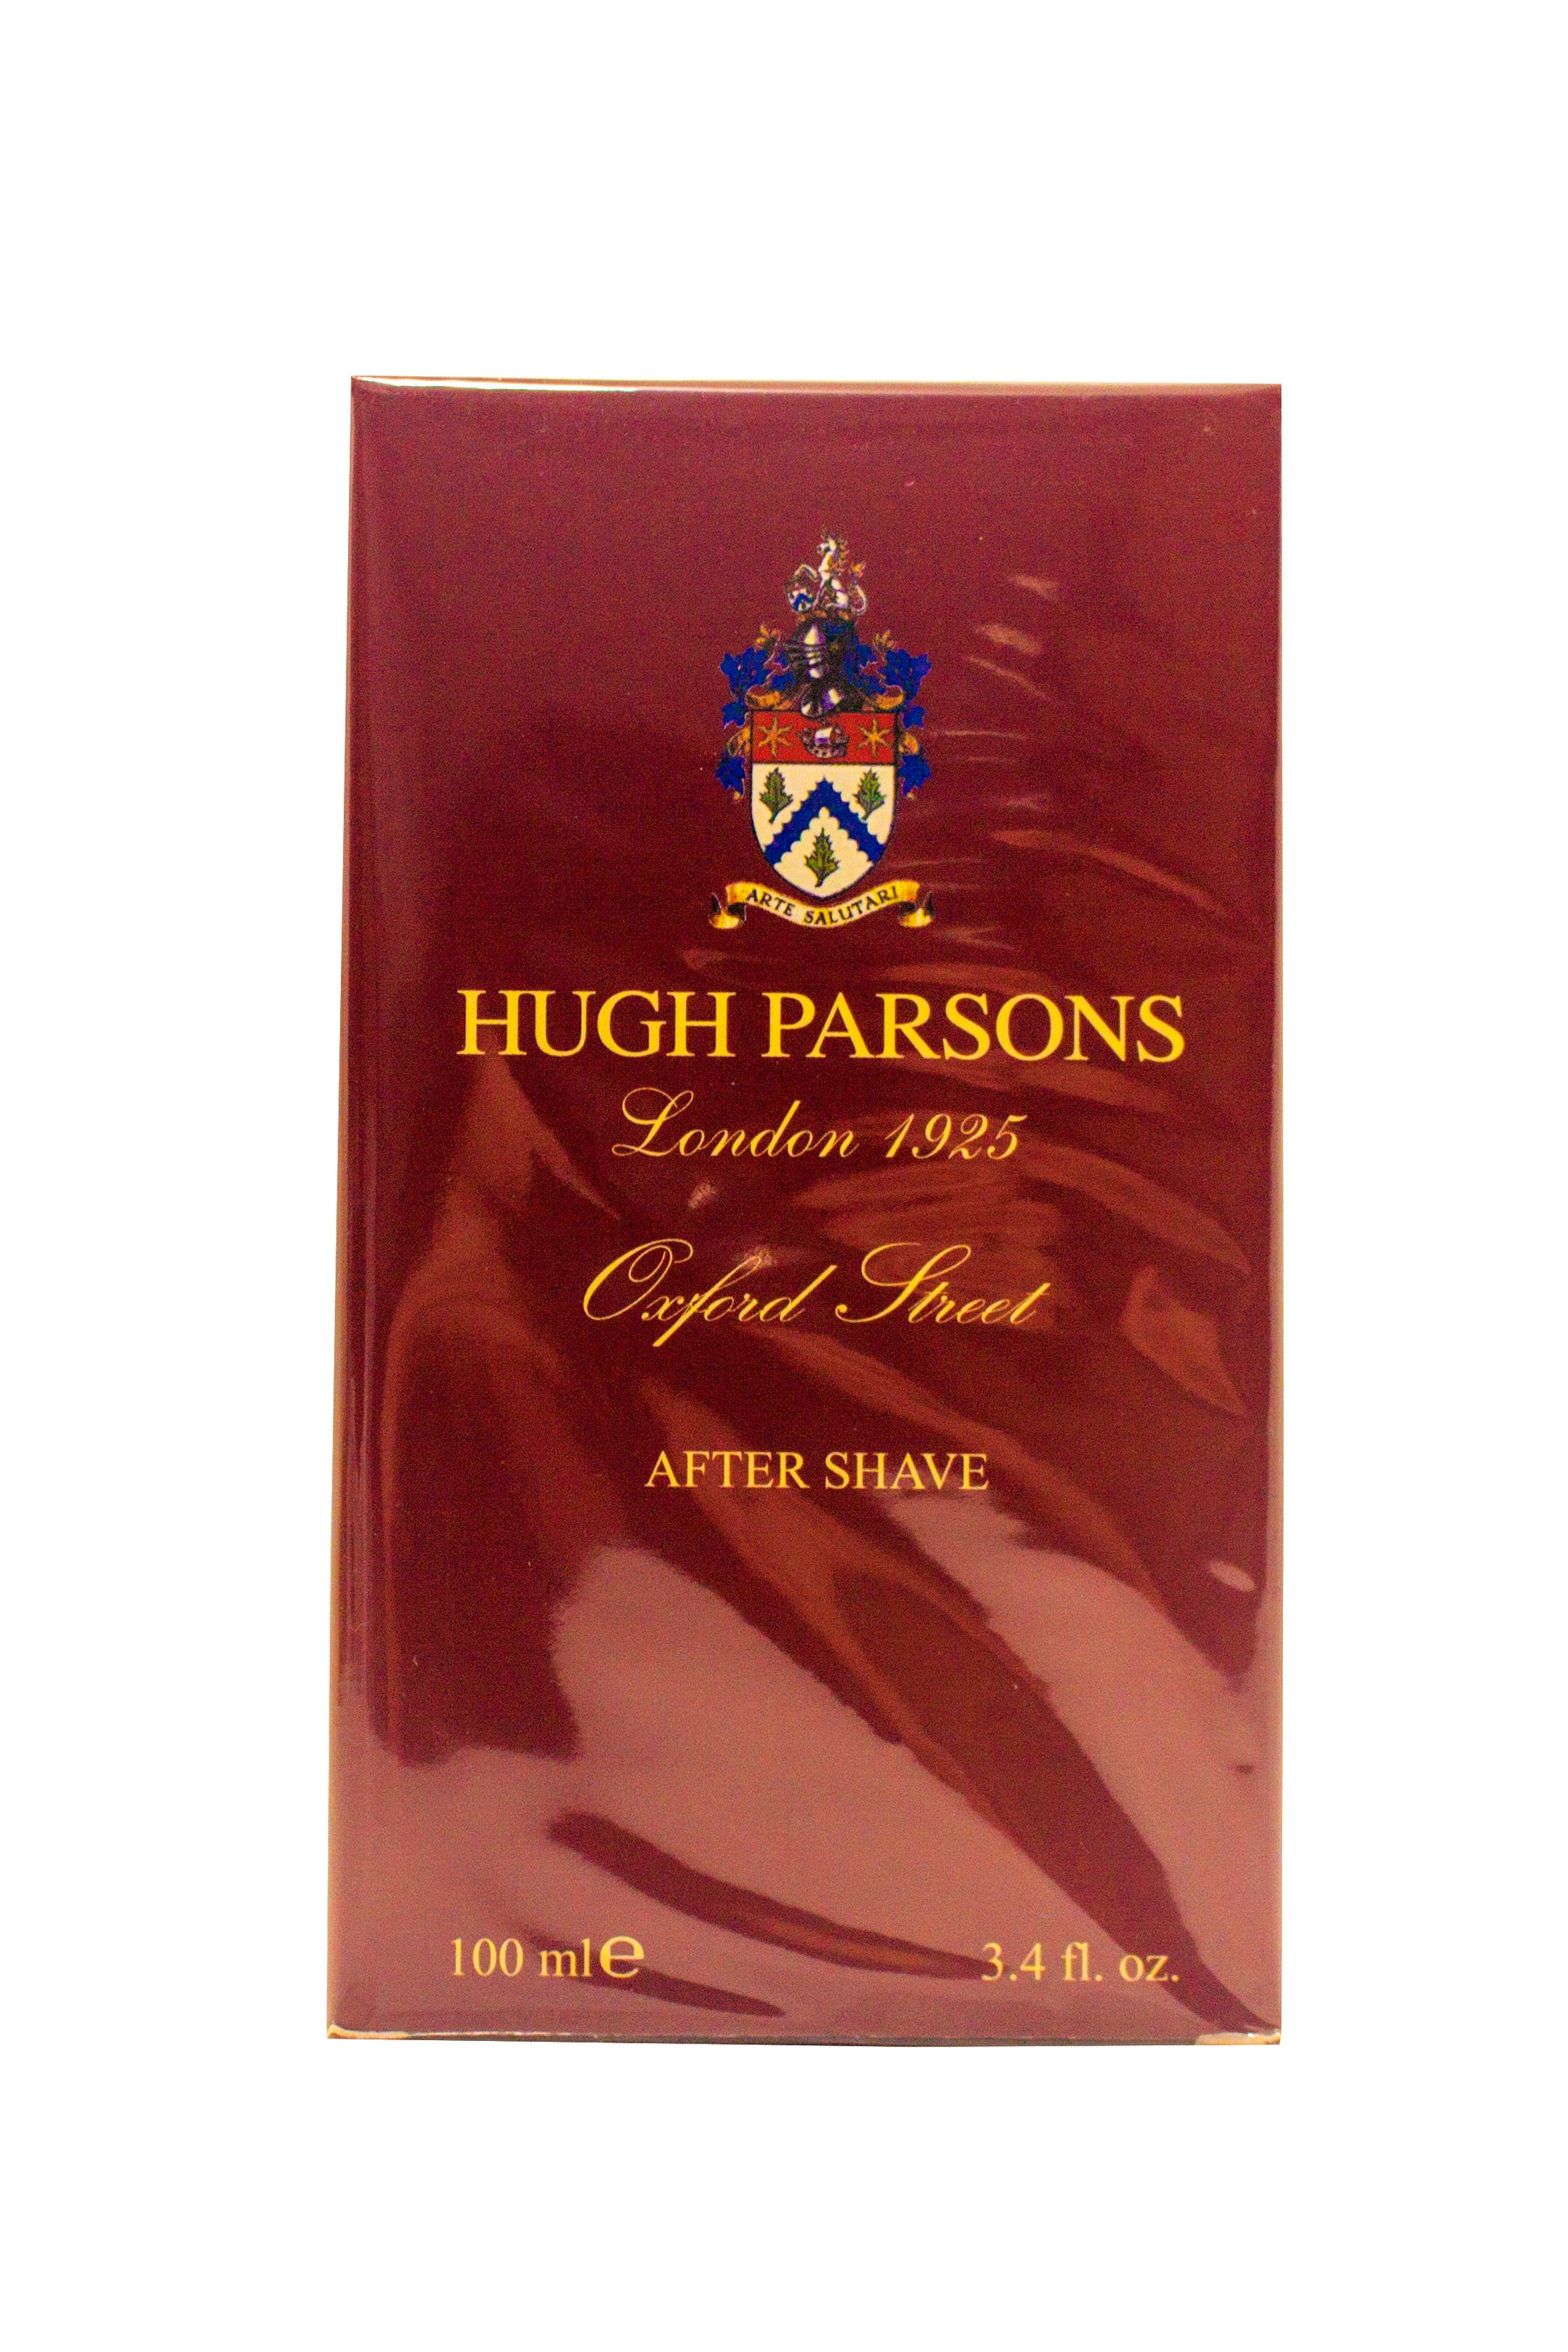 Hugh Parsons Oxford Street After Shave 100 ml - RossoLaccaStore